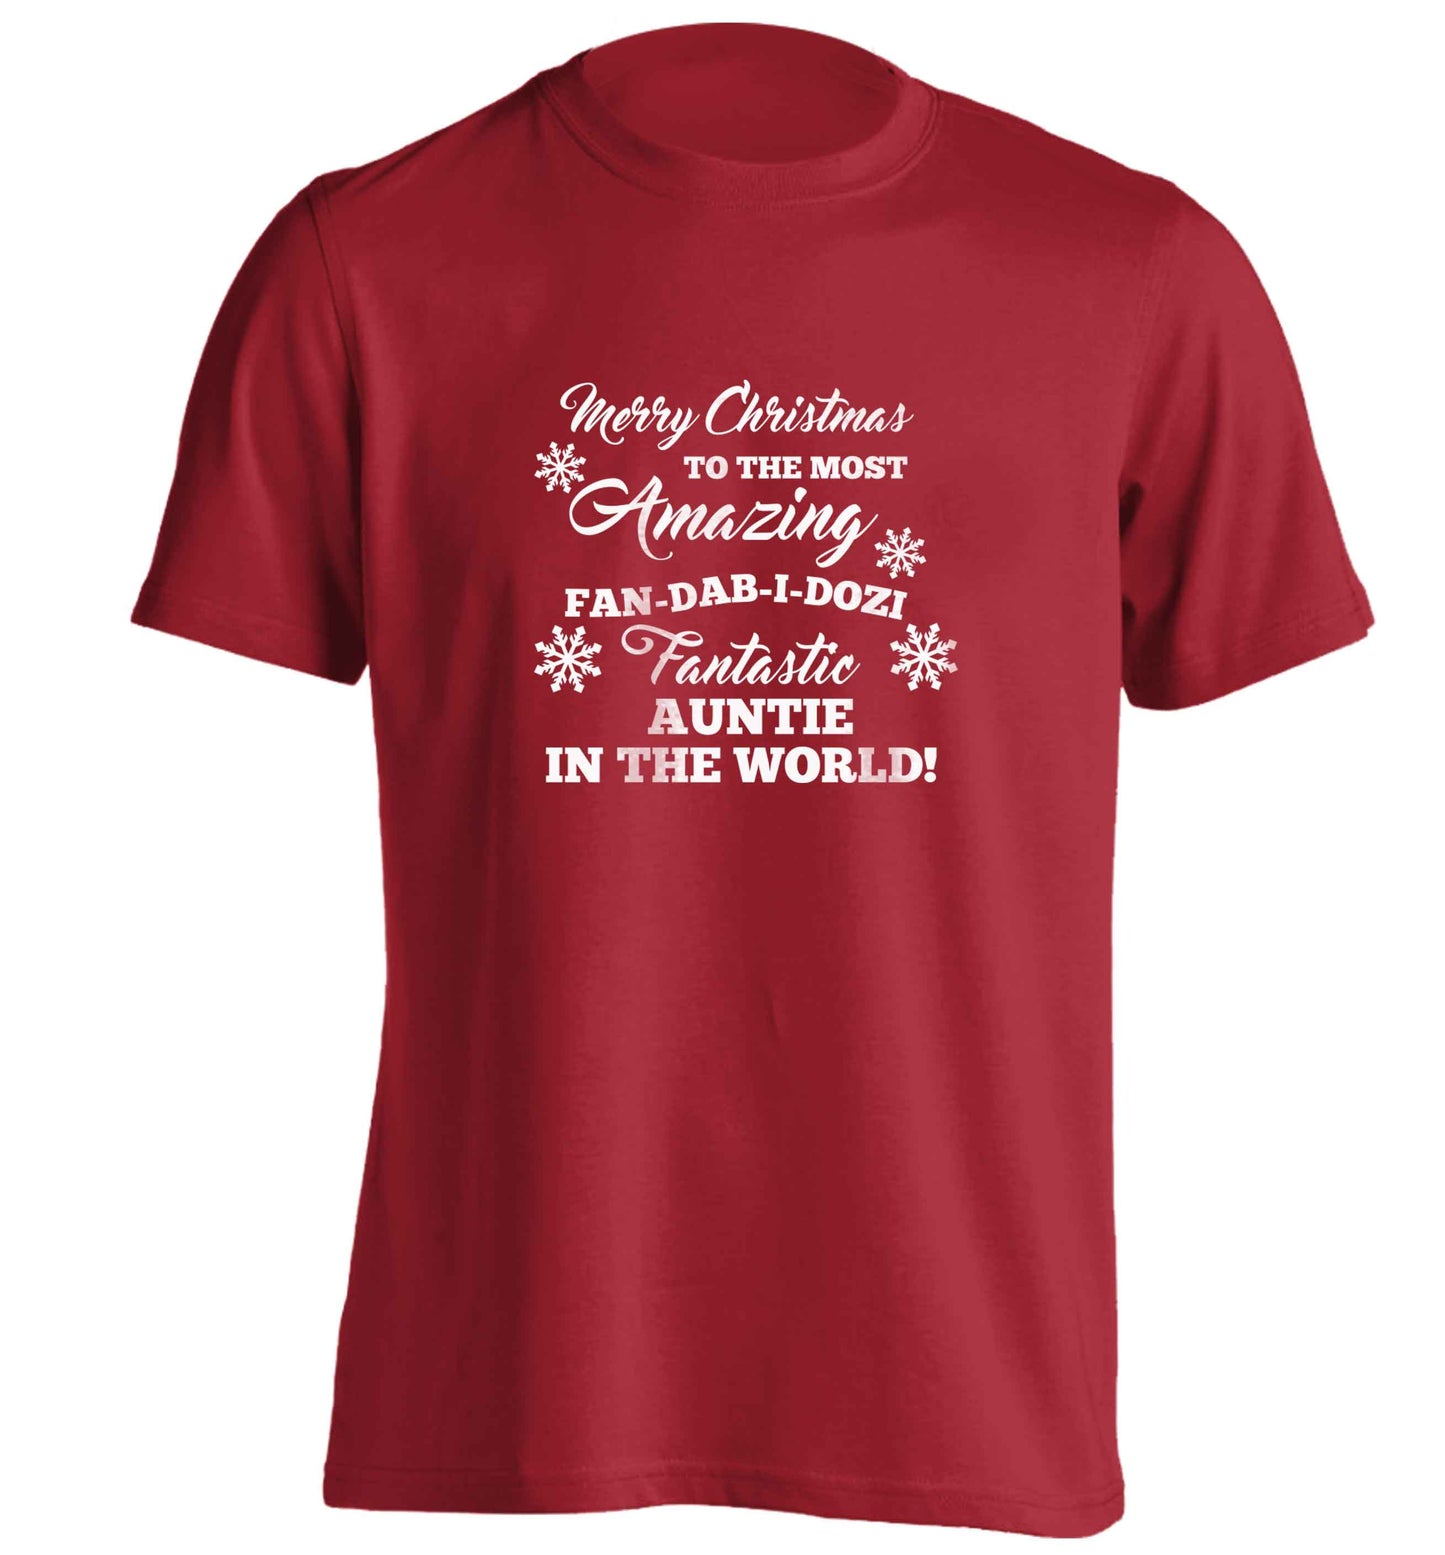 Merry Christmas to the most amazing fan-dab-i-dozi fantasic Auntie in the world adults unisex red Tshirt 2XL